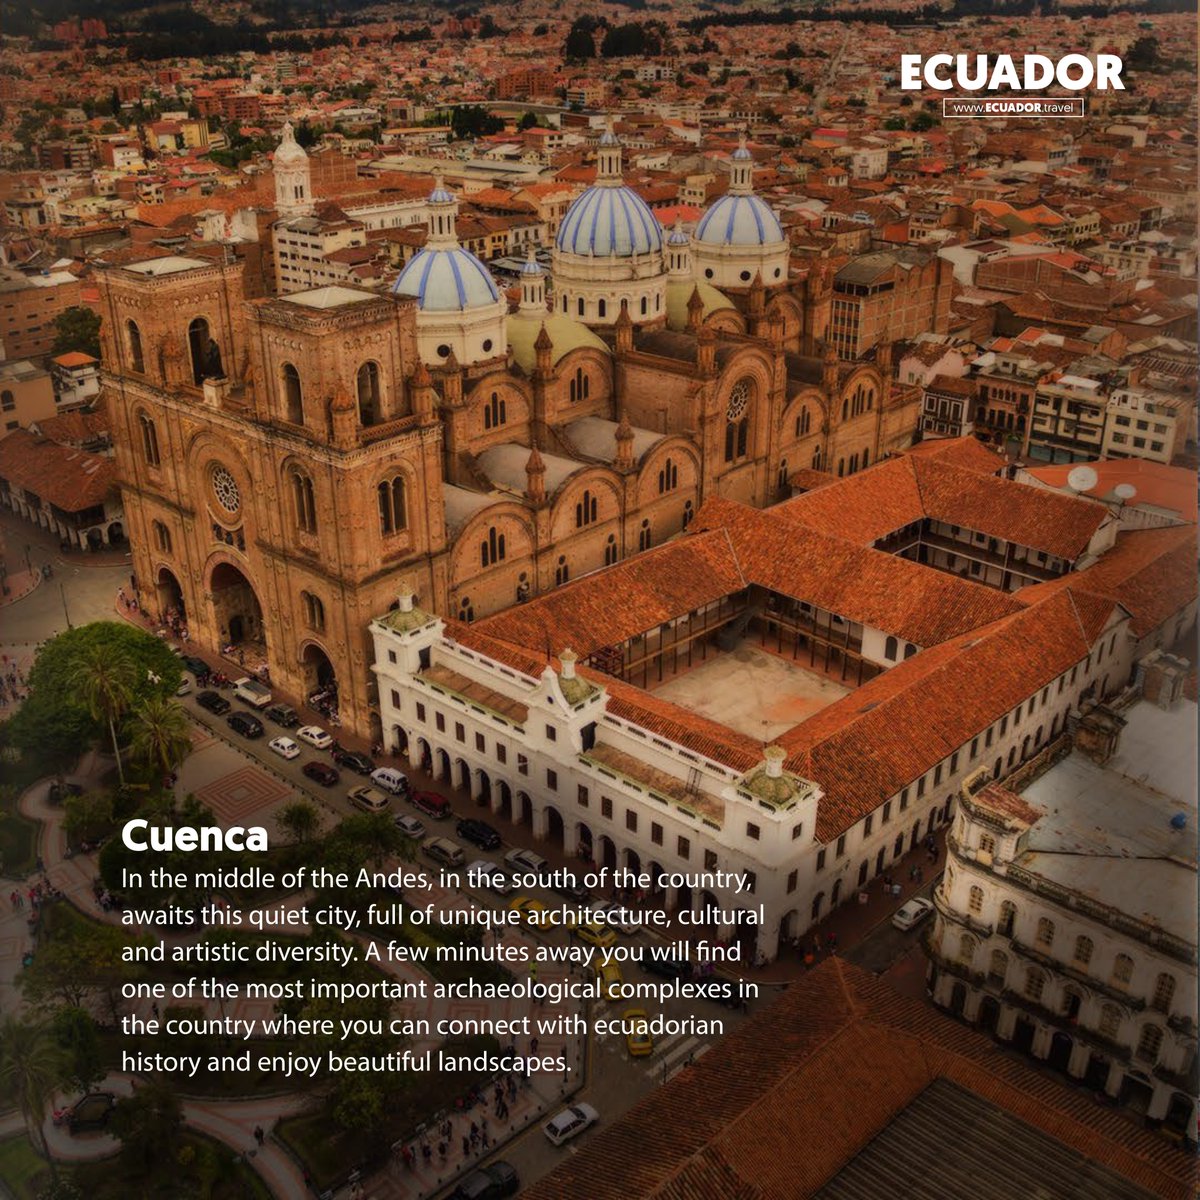 Ecuador is an unique destination! In the Meeting Industry Month discover the natural, cultural, heritage and modern settings that makes Ecuador the most authentic experience for meeting travelers.
#VisitEcuador #BeWellinEcuador #MICE #MeetingIndustry